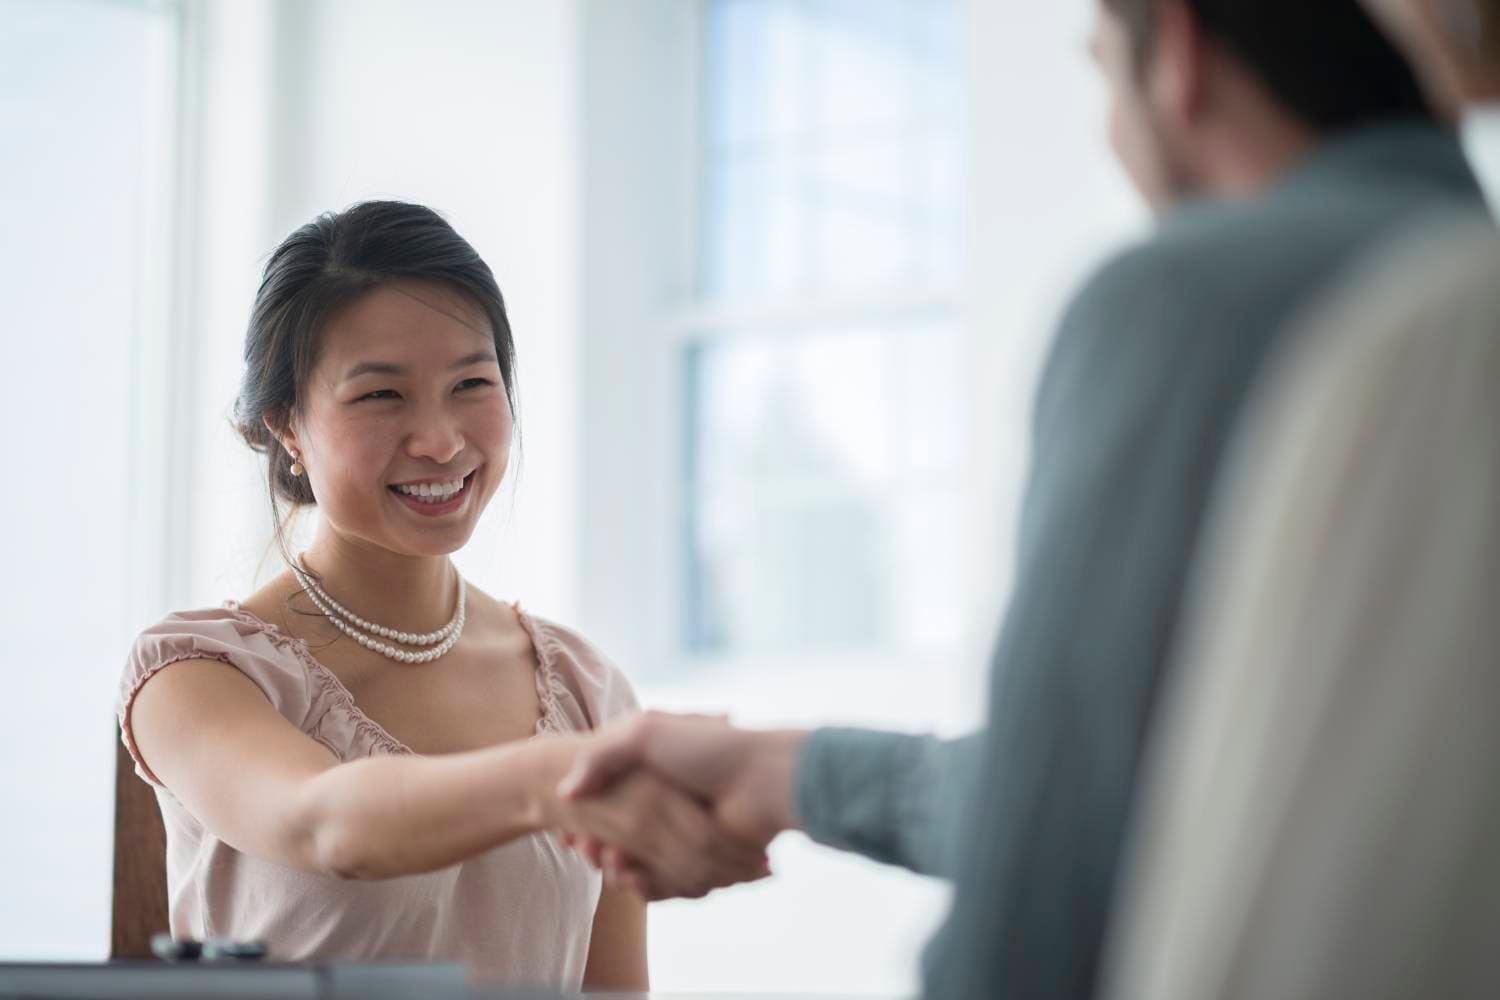 A smiling Asian woman shakes hands with another person